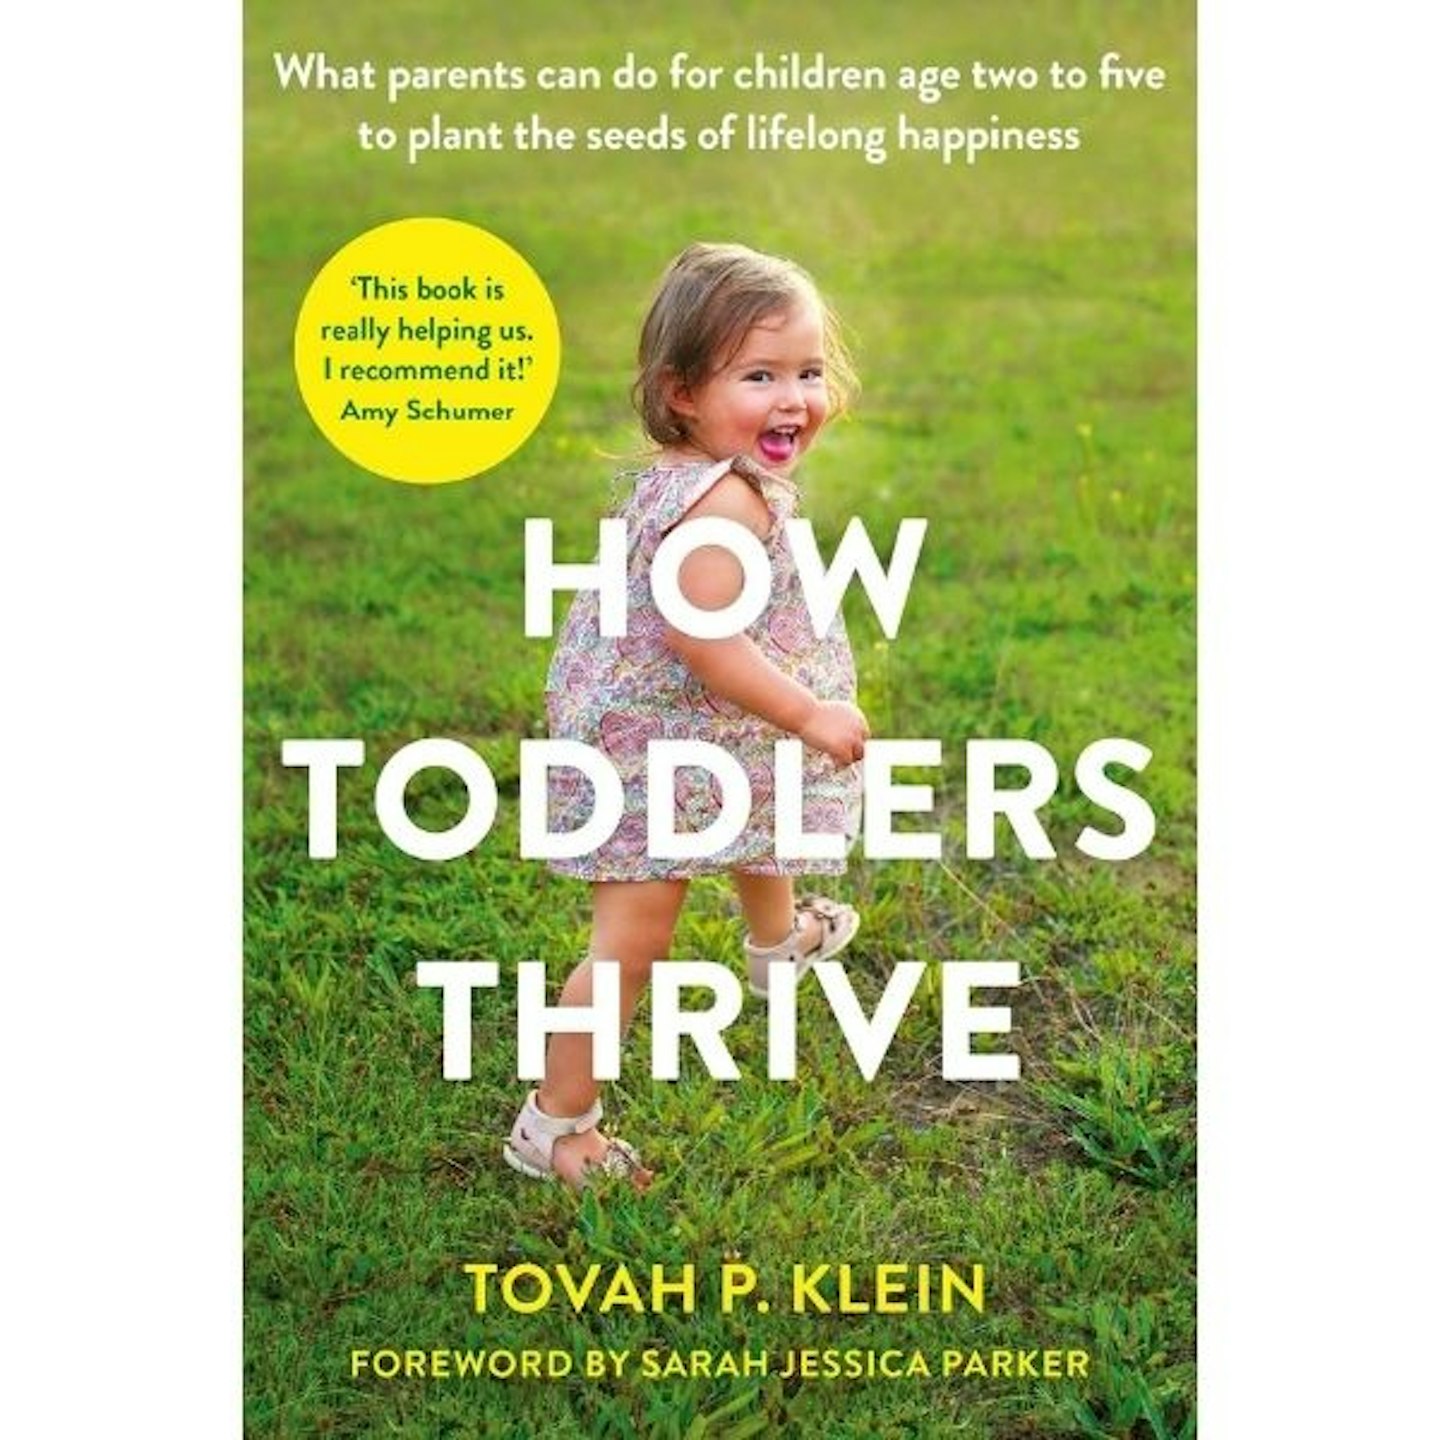 How Toddlers Thrive, By Tovah P. Klein